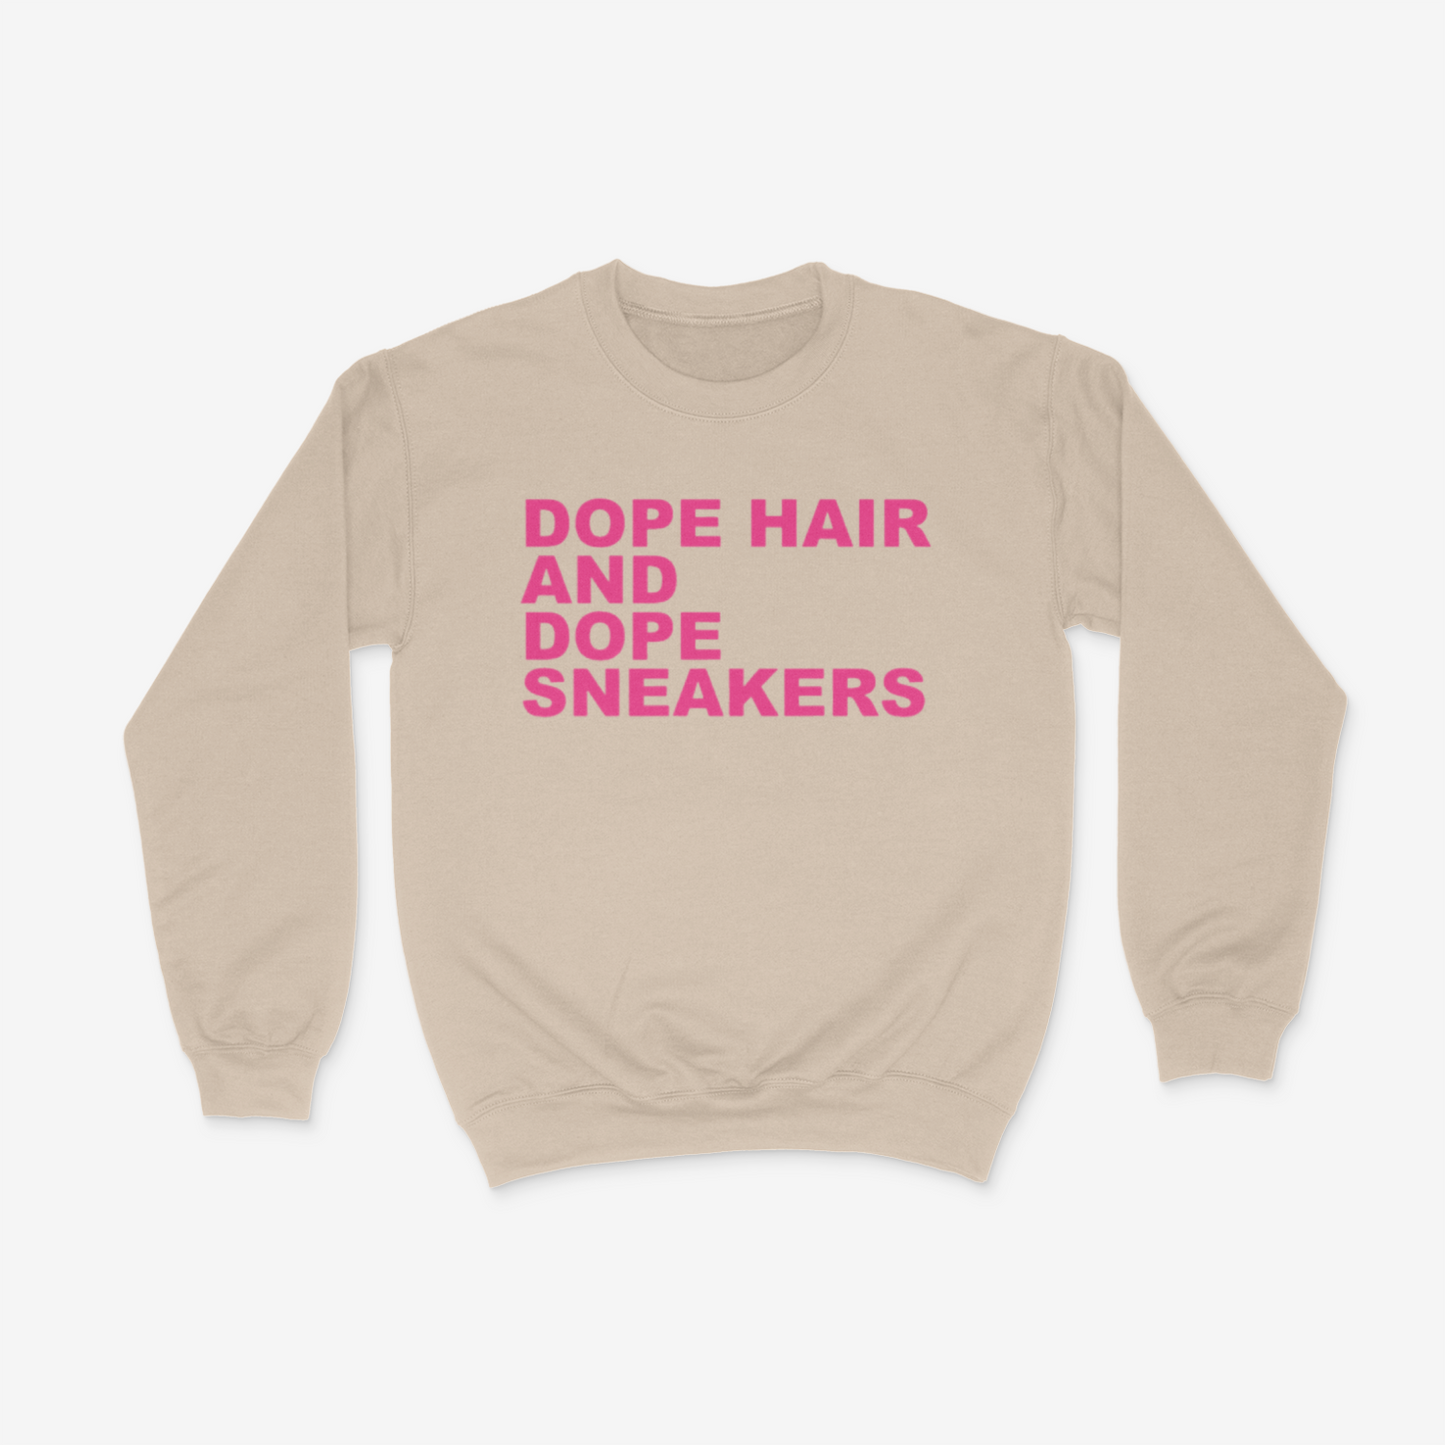 Dope Hair and Dope Sneakers Crewneck (Pink)